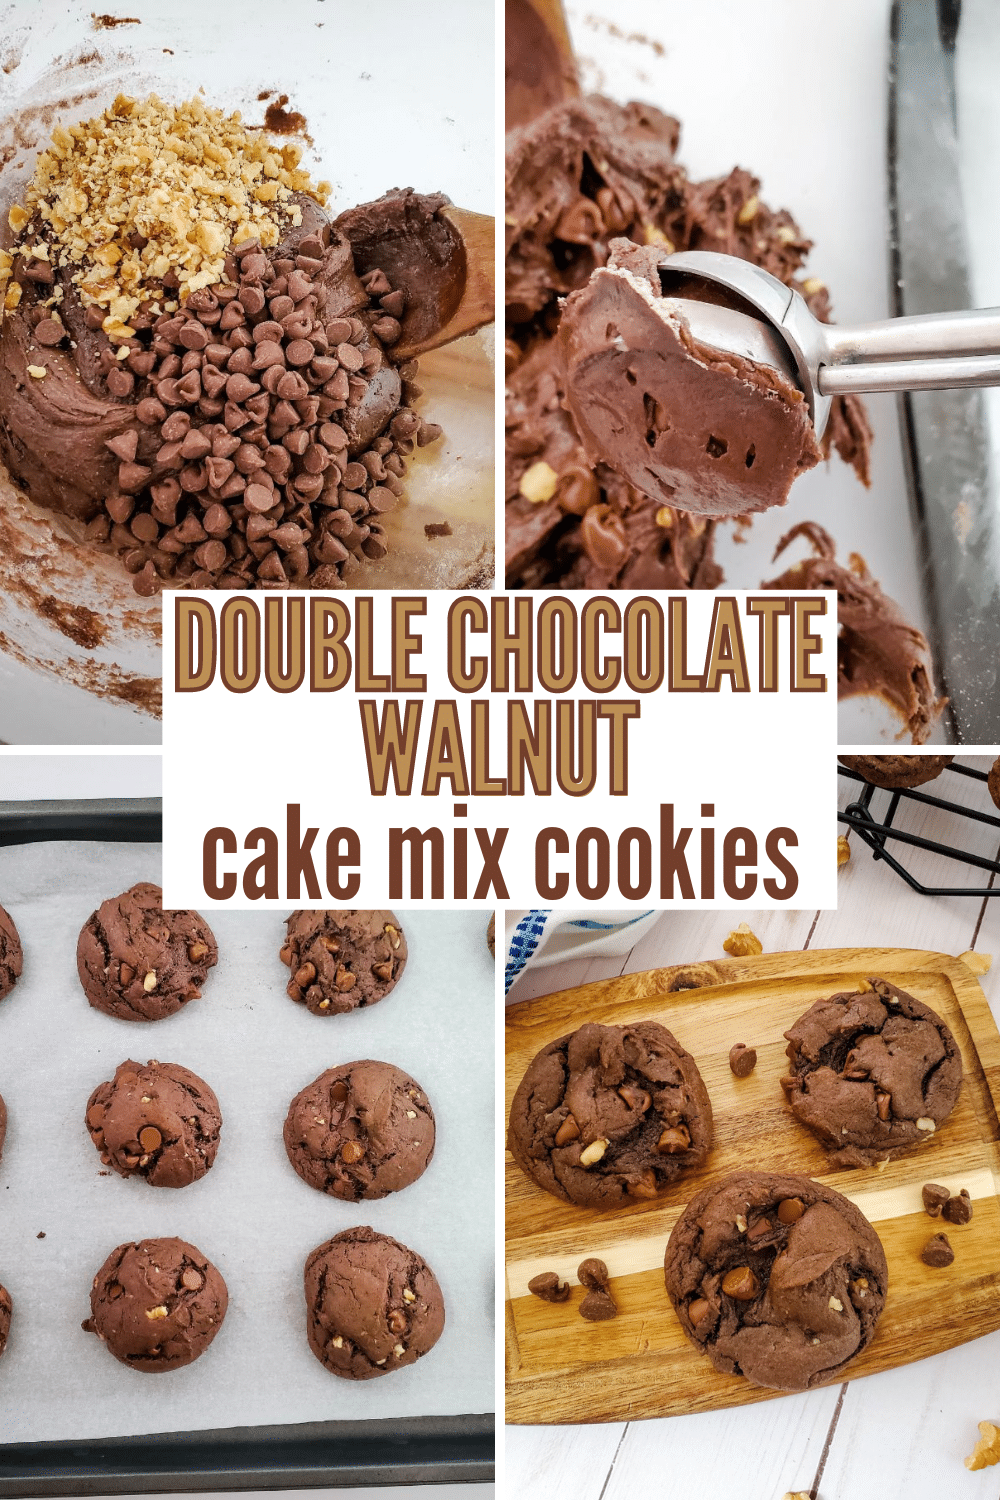 Double Chocolate Walnut Cookies are an easy dessert you can whip up in a few minutes. These rich and chewy cookies are a crowd-pleaser. #cookies #doublechocolate #chocolatecookies #walnut via @wondermomwannab